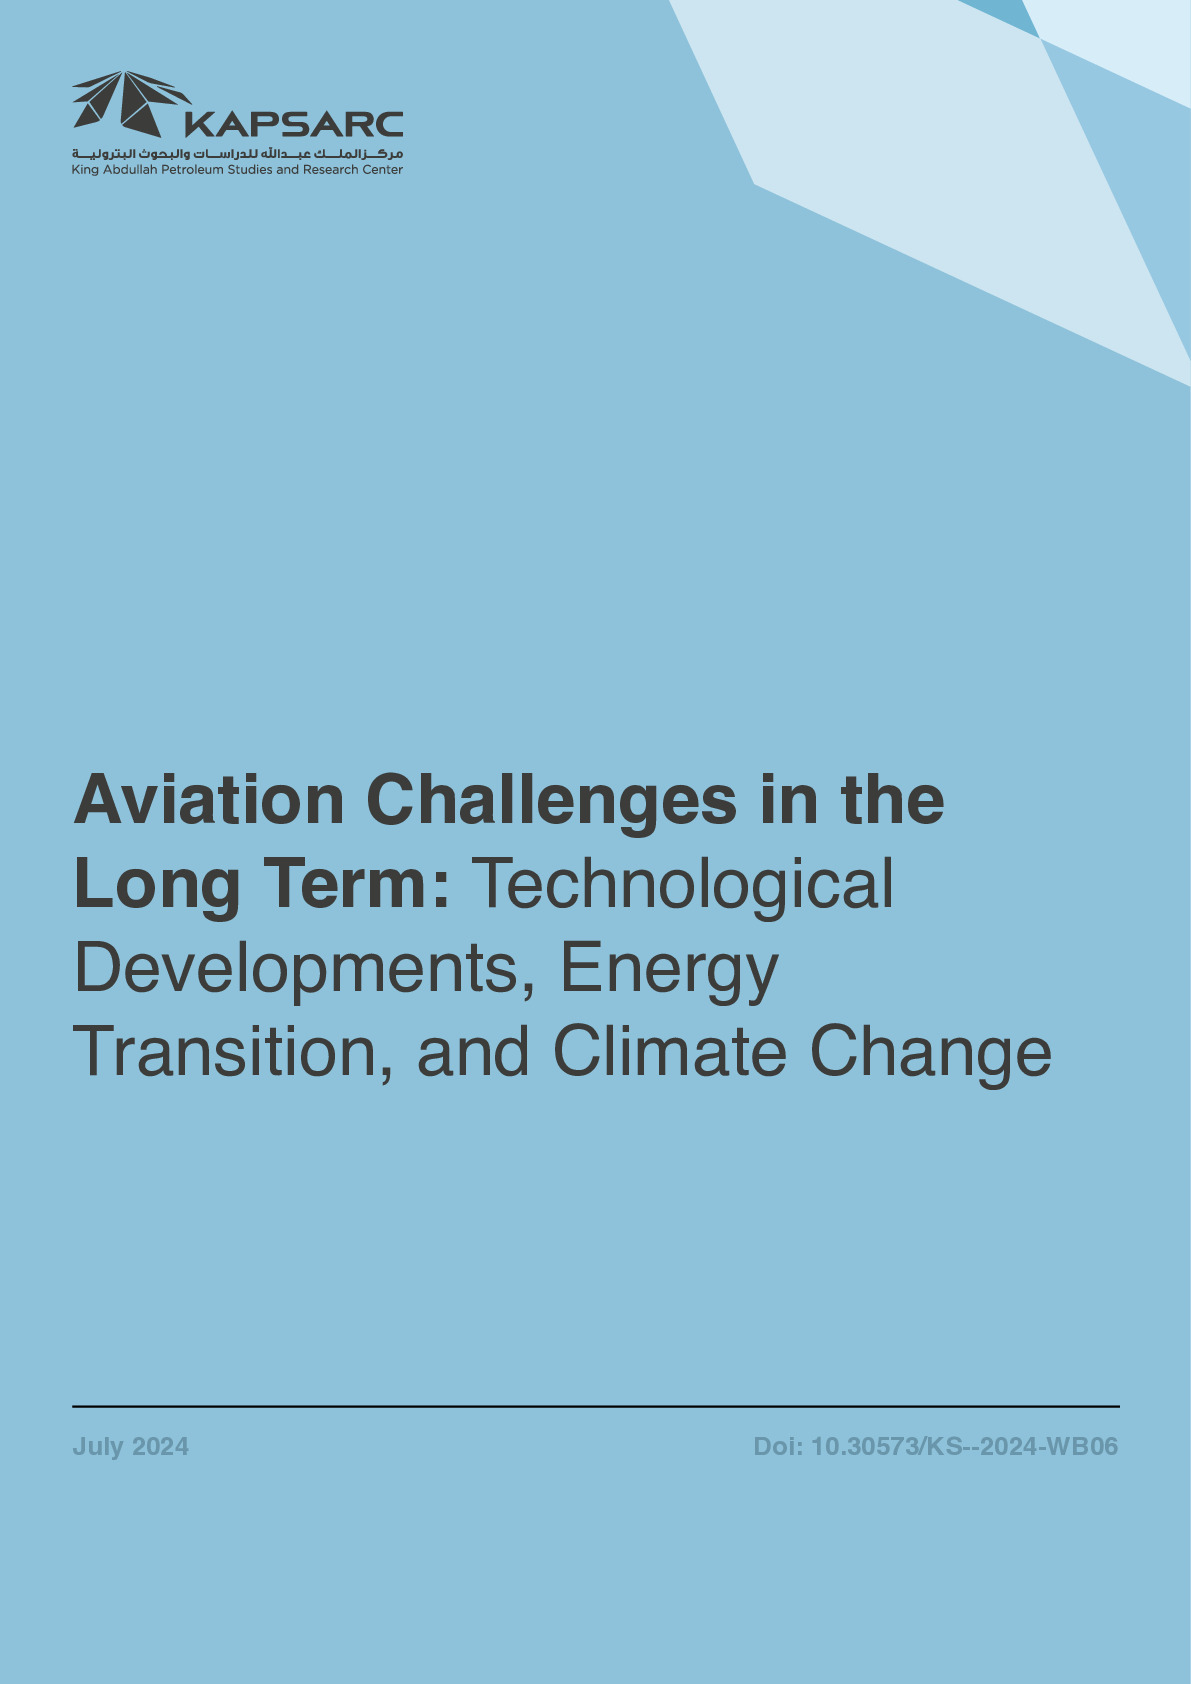 Aviation Challenges in the Long Term: Technological Developments, Energy Transition, and Climate…